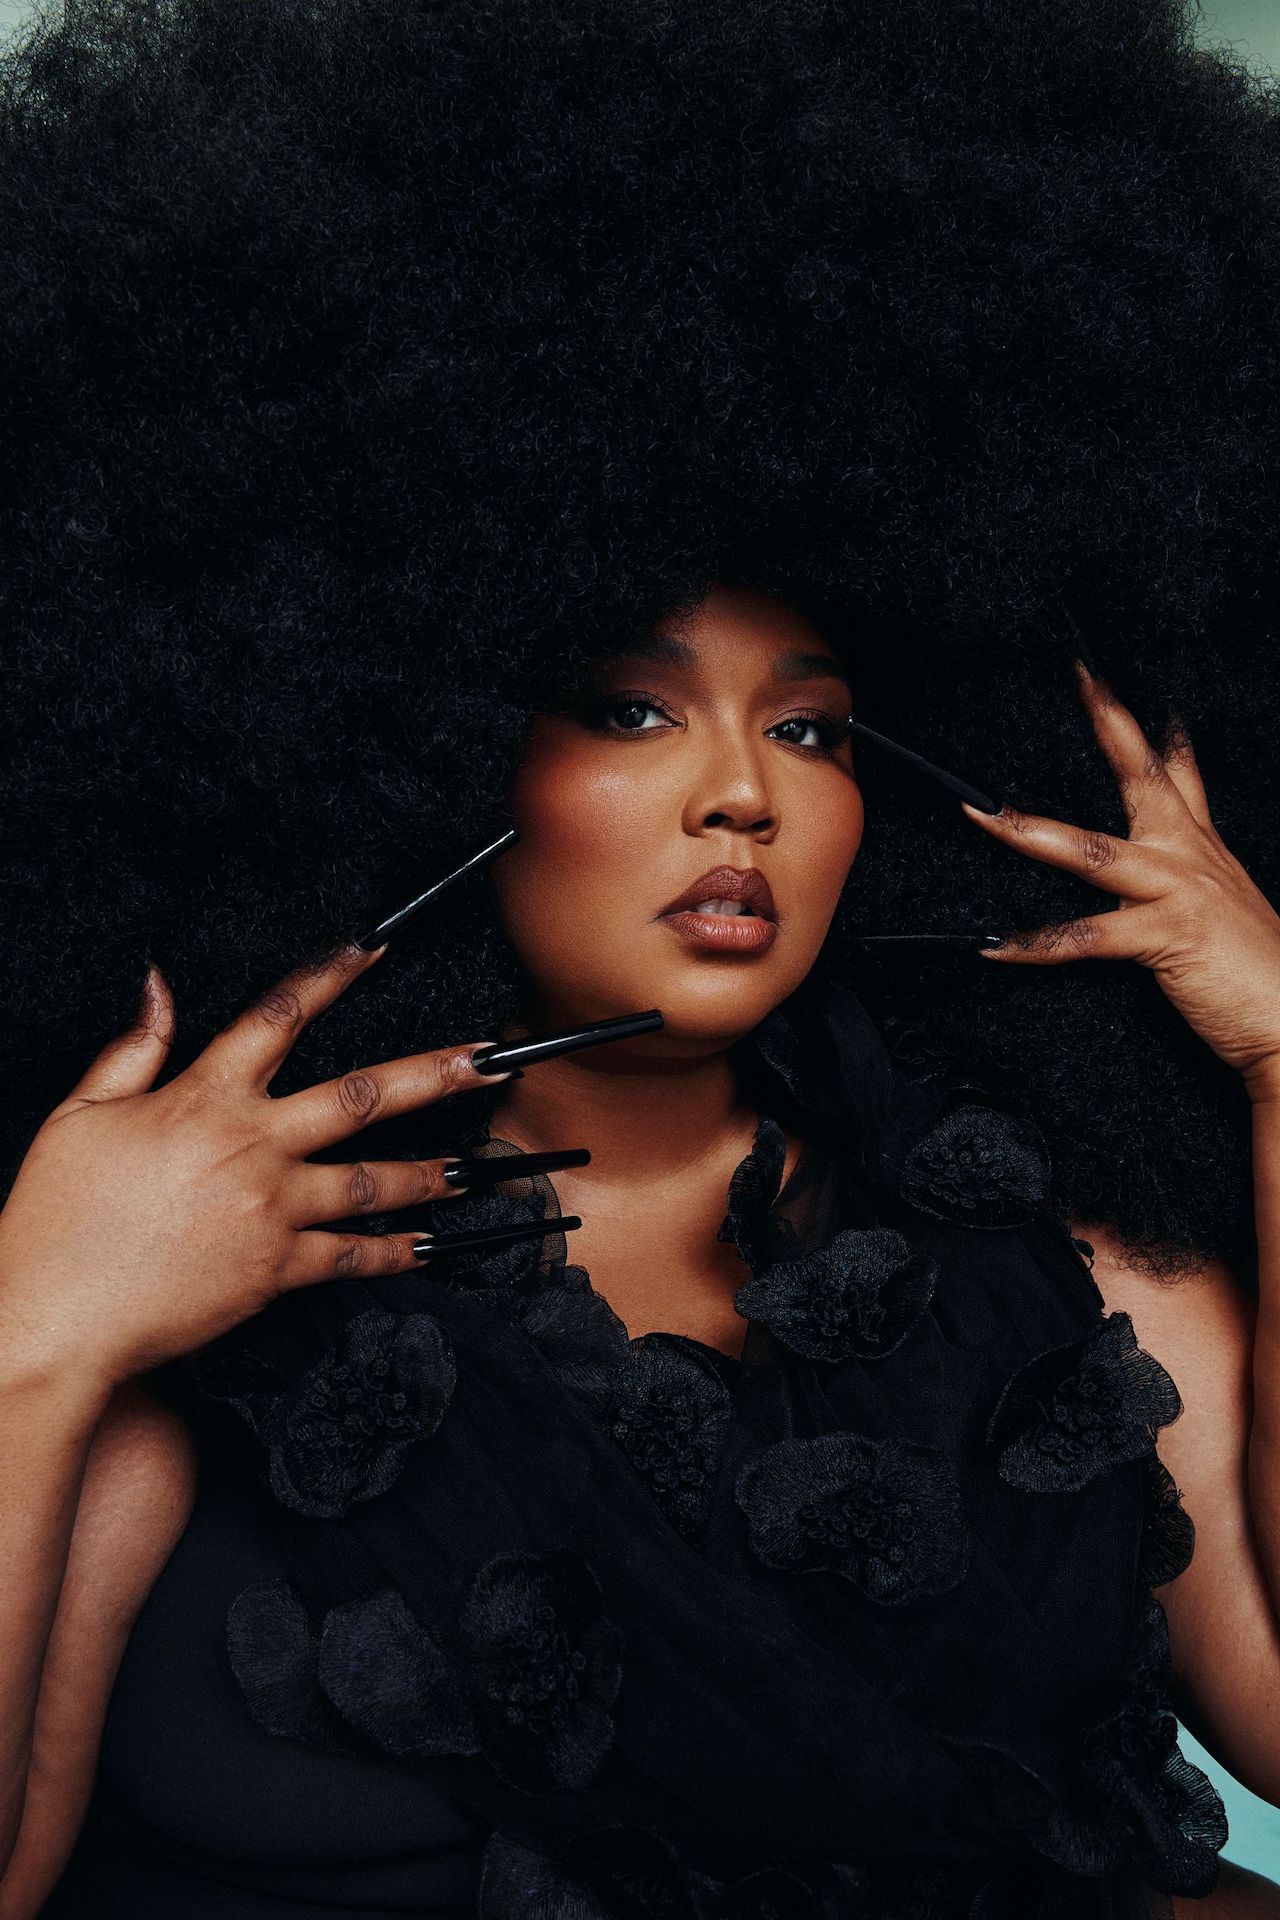 Lizzo changed the lyrics to her new song “Grrrls” on Monday after it received criticism for containing an ableist slur.